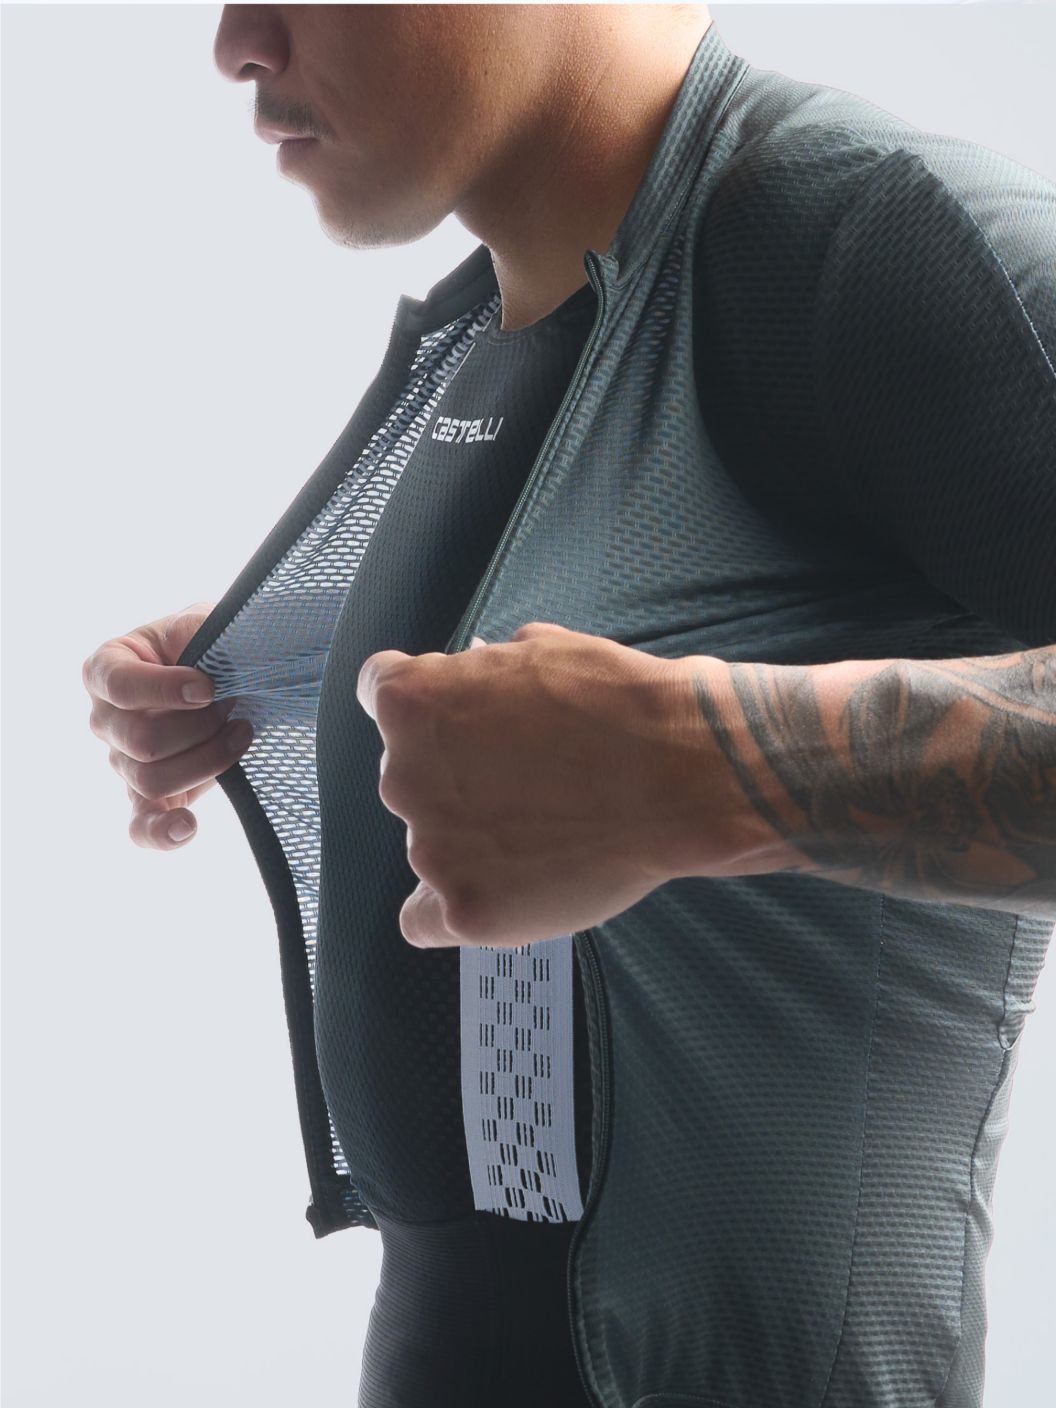 A rider pulls an unzipped jersey forward as if to zip it up to prepare for an indoor training session. 